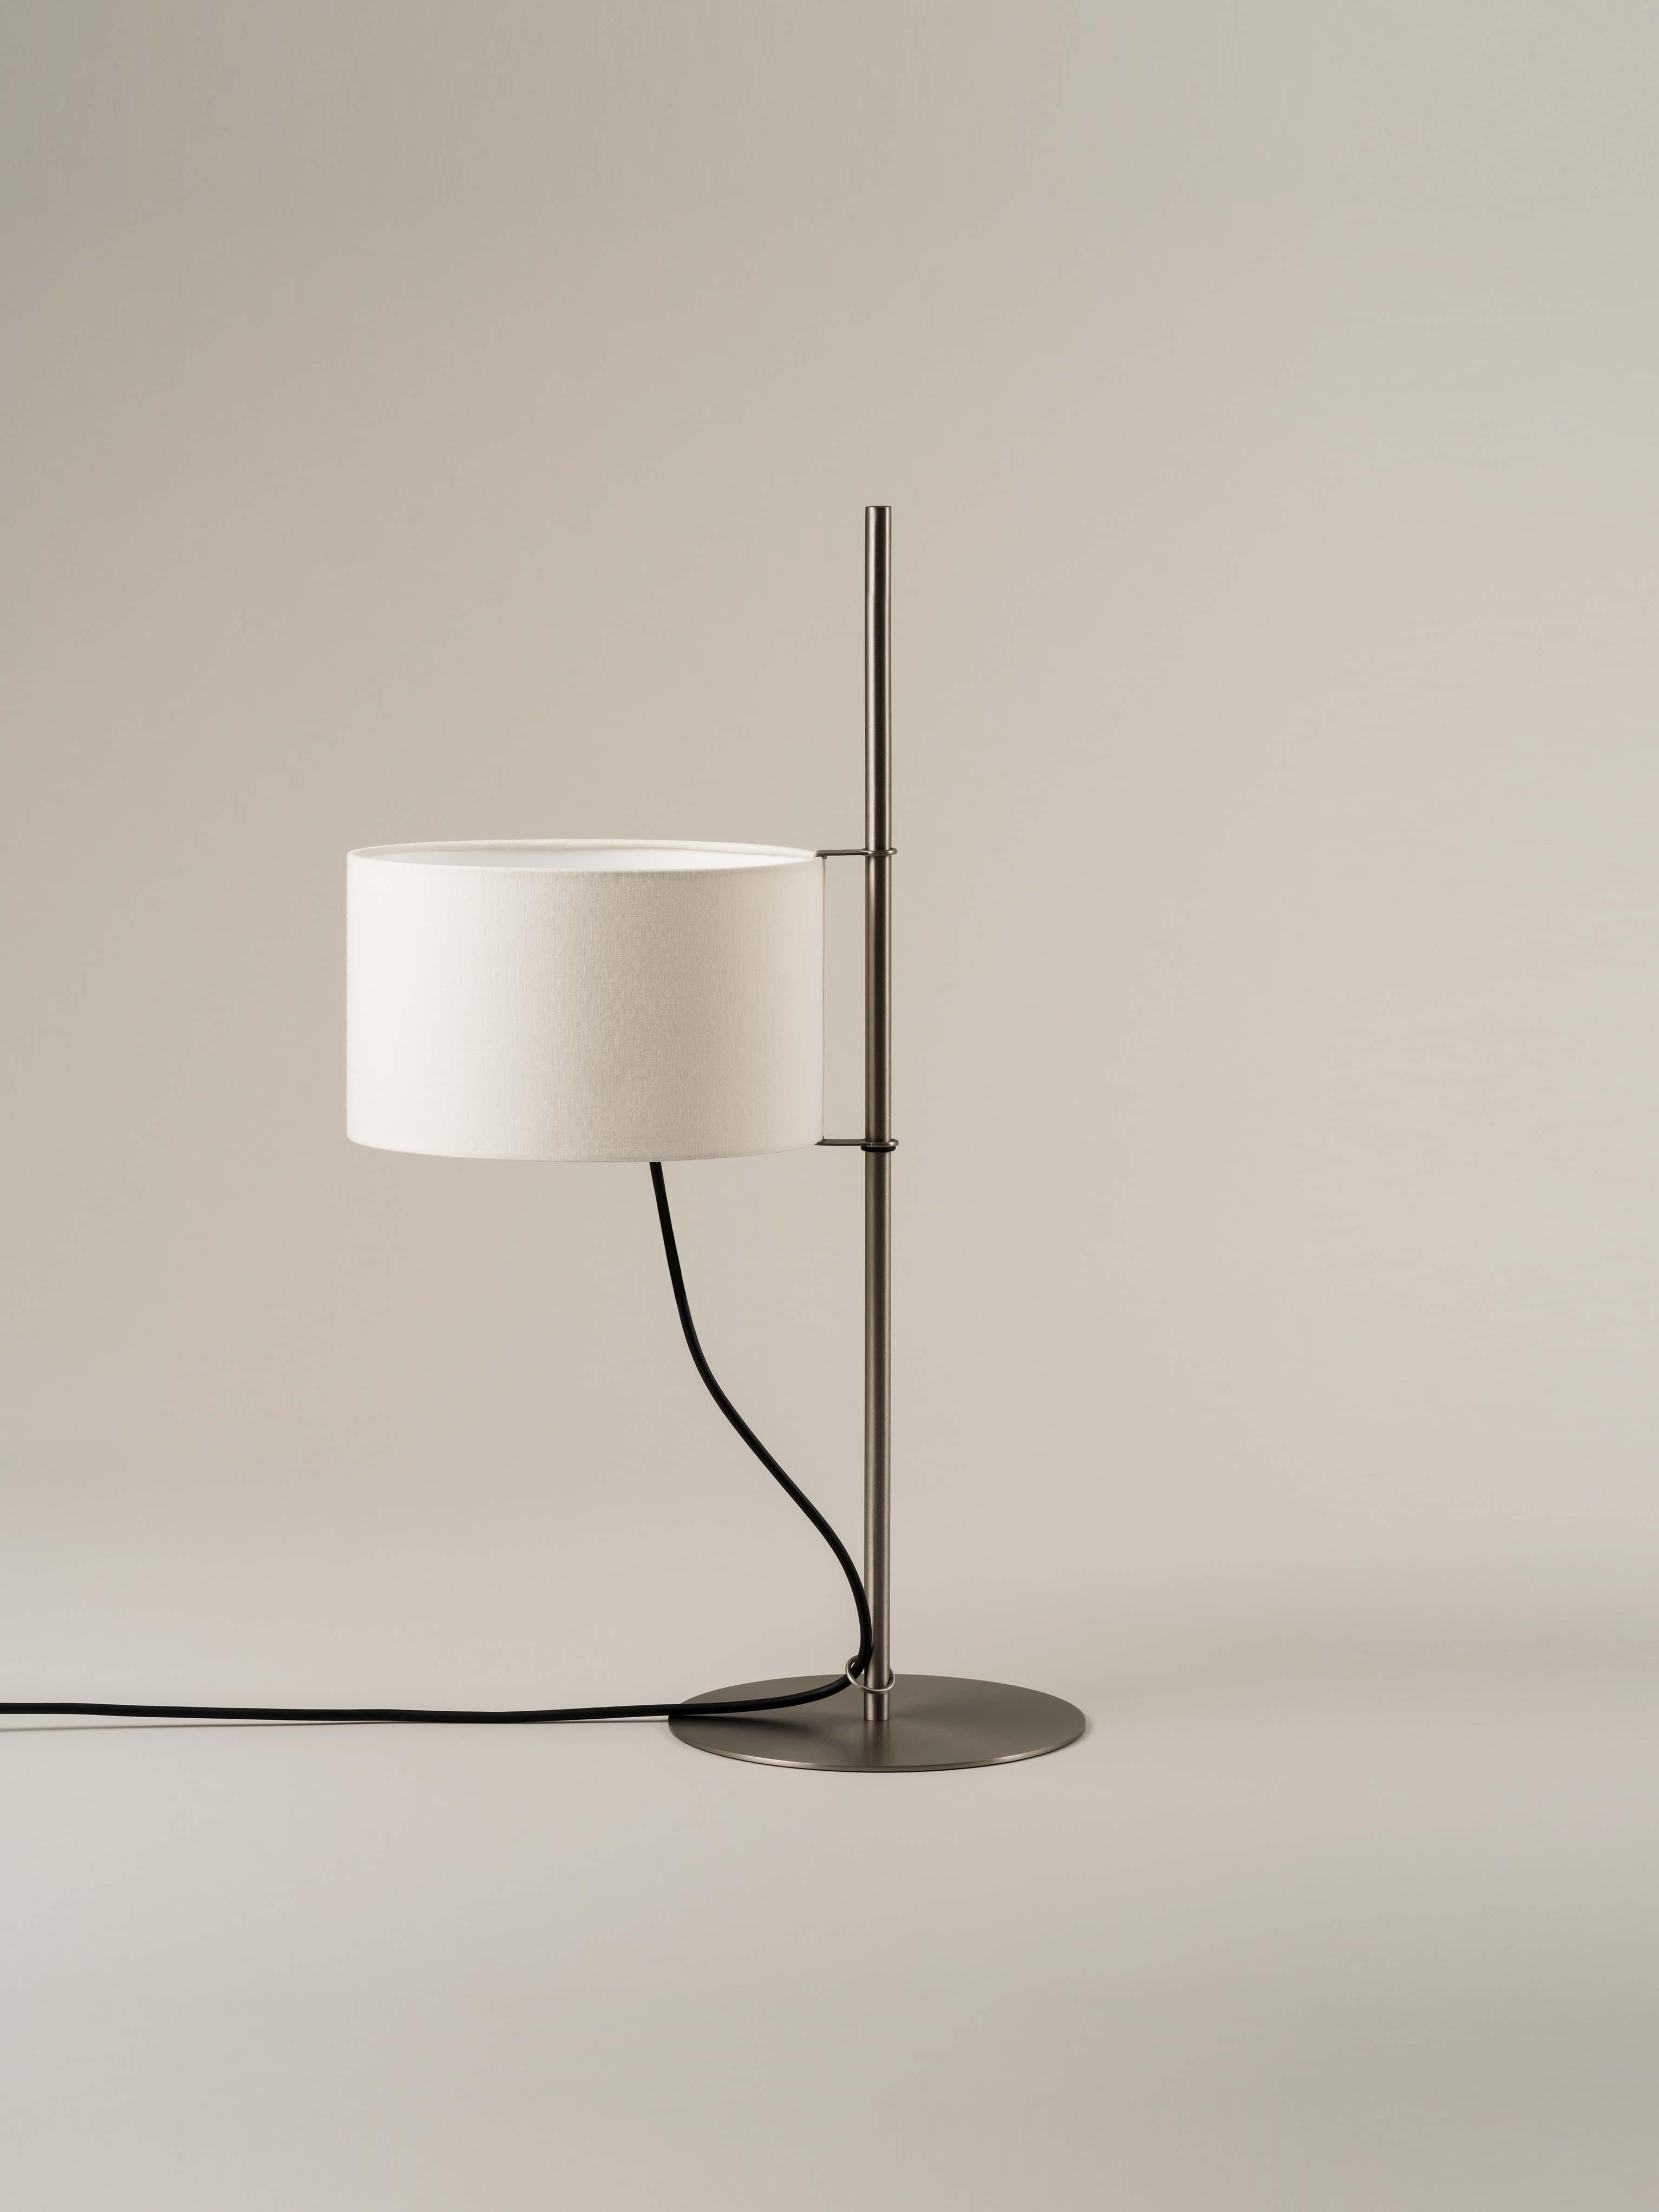 TMD table lamp by Miguel Milá
Dimensions: D 25 x W 39 x H 65 cm
Materials: Linen, nickel.

With a structure supported by a circular metal base, the while linen shade of the TMD lamp looks like a sail hoisted on a mast. Whether switched on or